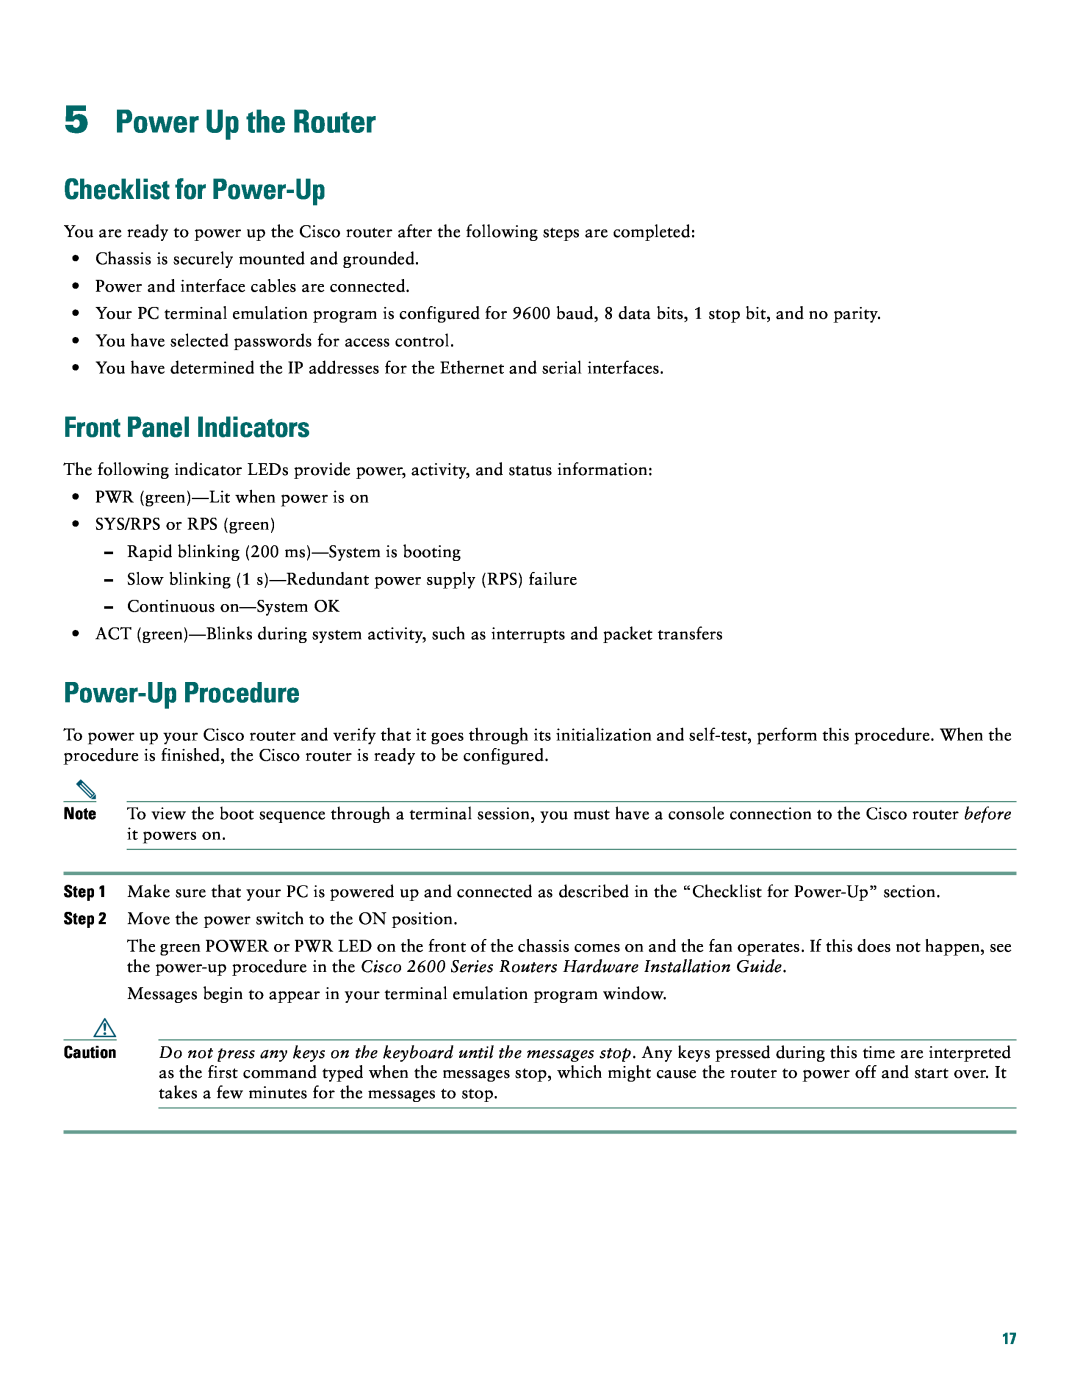 Cisco Systems 2691 quick start Power Up the Router, Checklist for Power-Up, Front Panel Indicators, Power-Up Procedure 